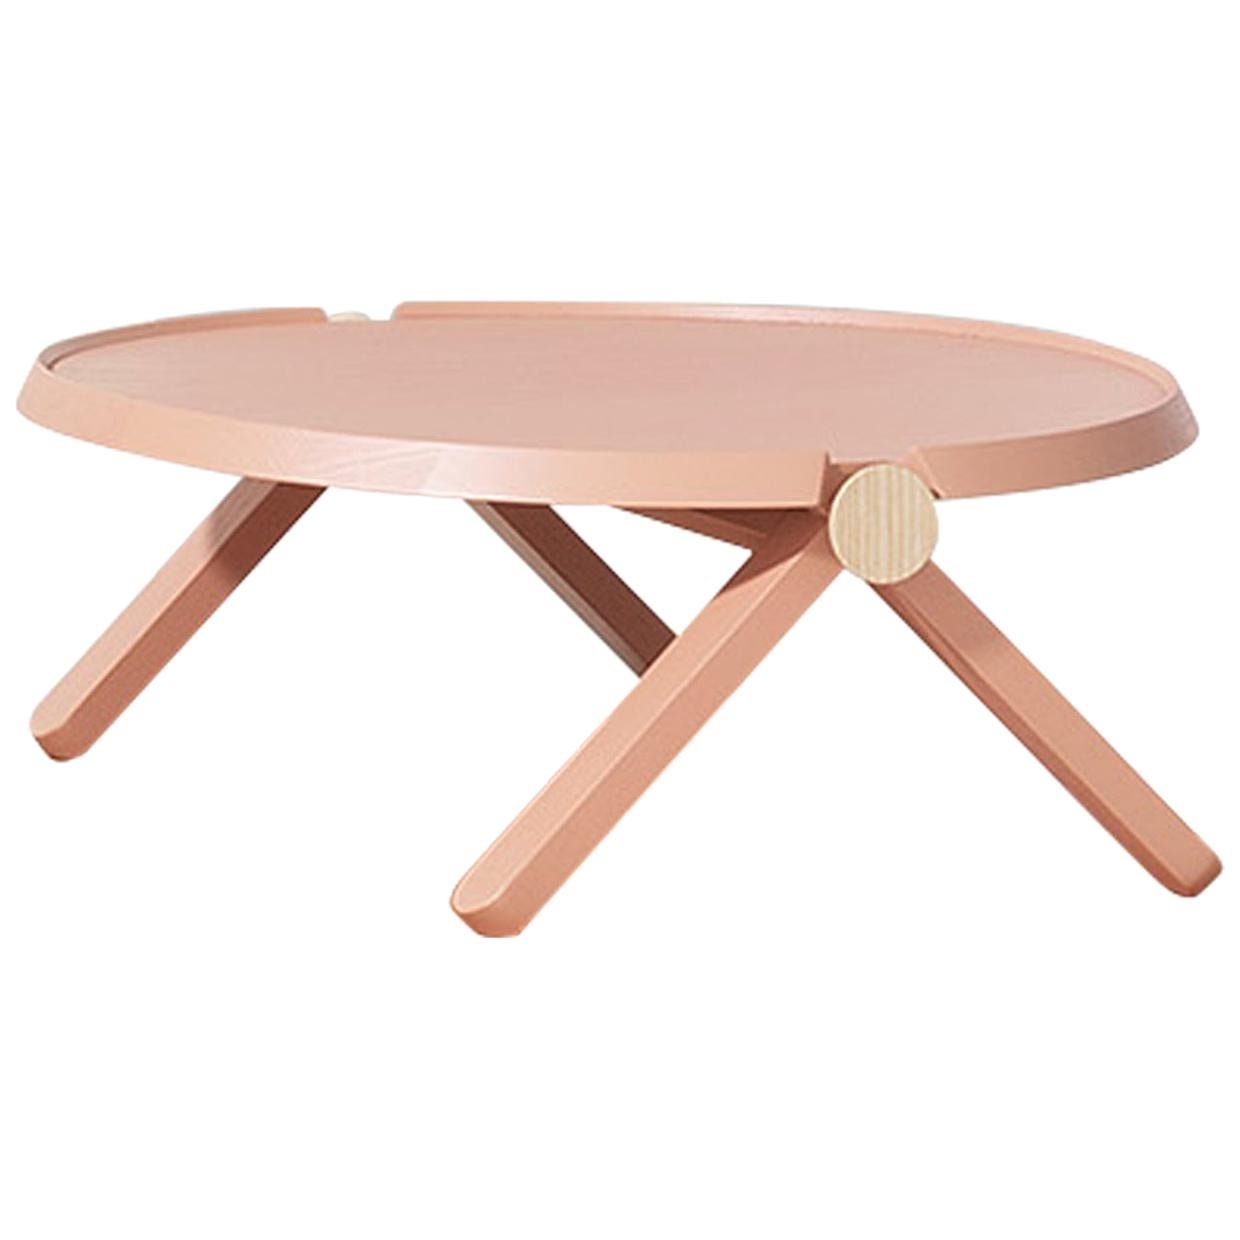 Lilliput 310 Salmon Coffee Table by Studioventotto